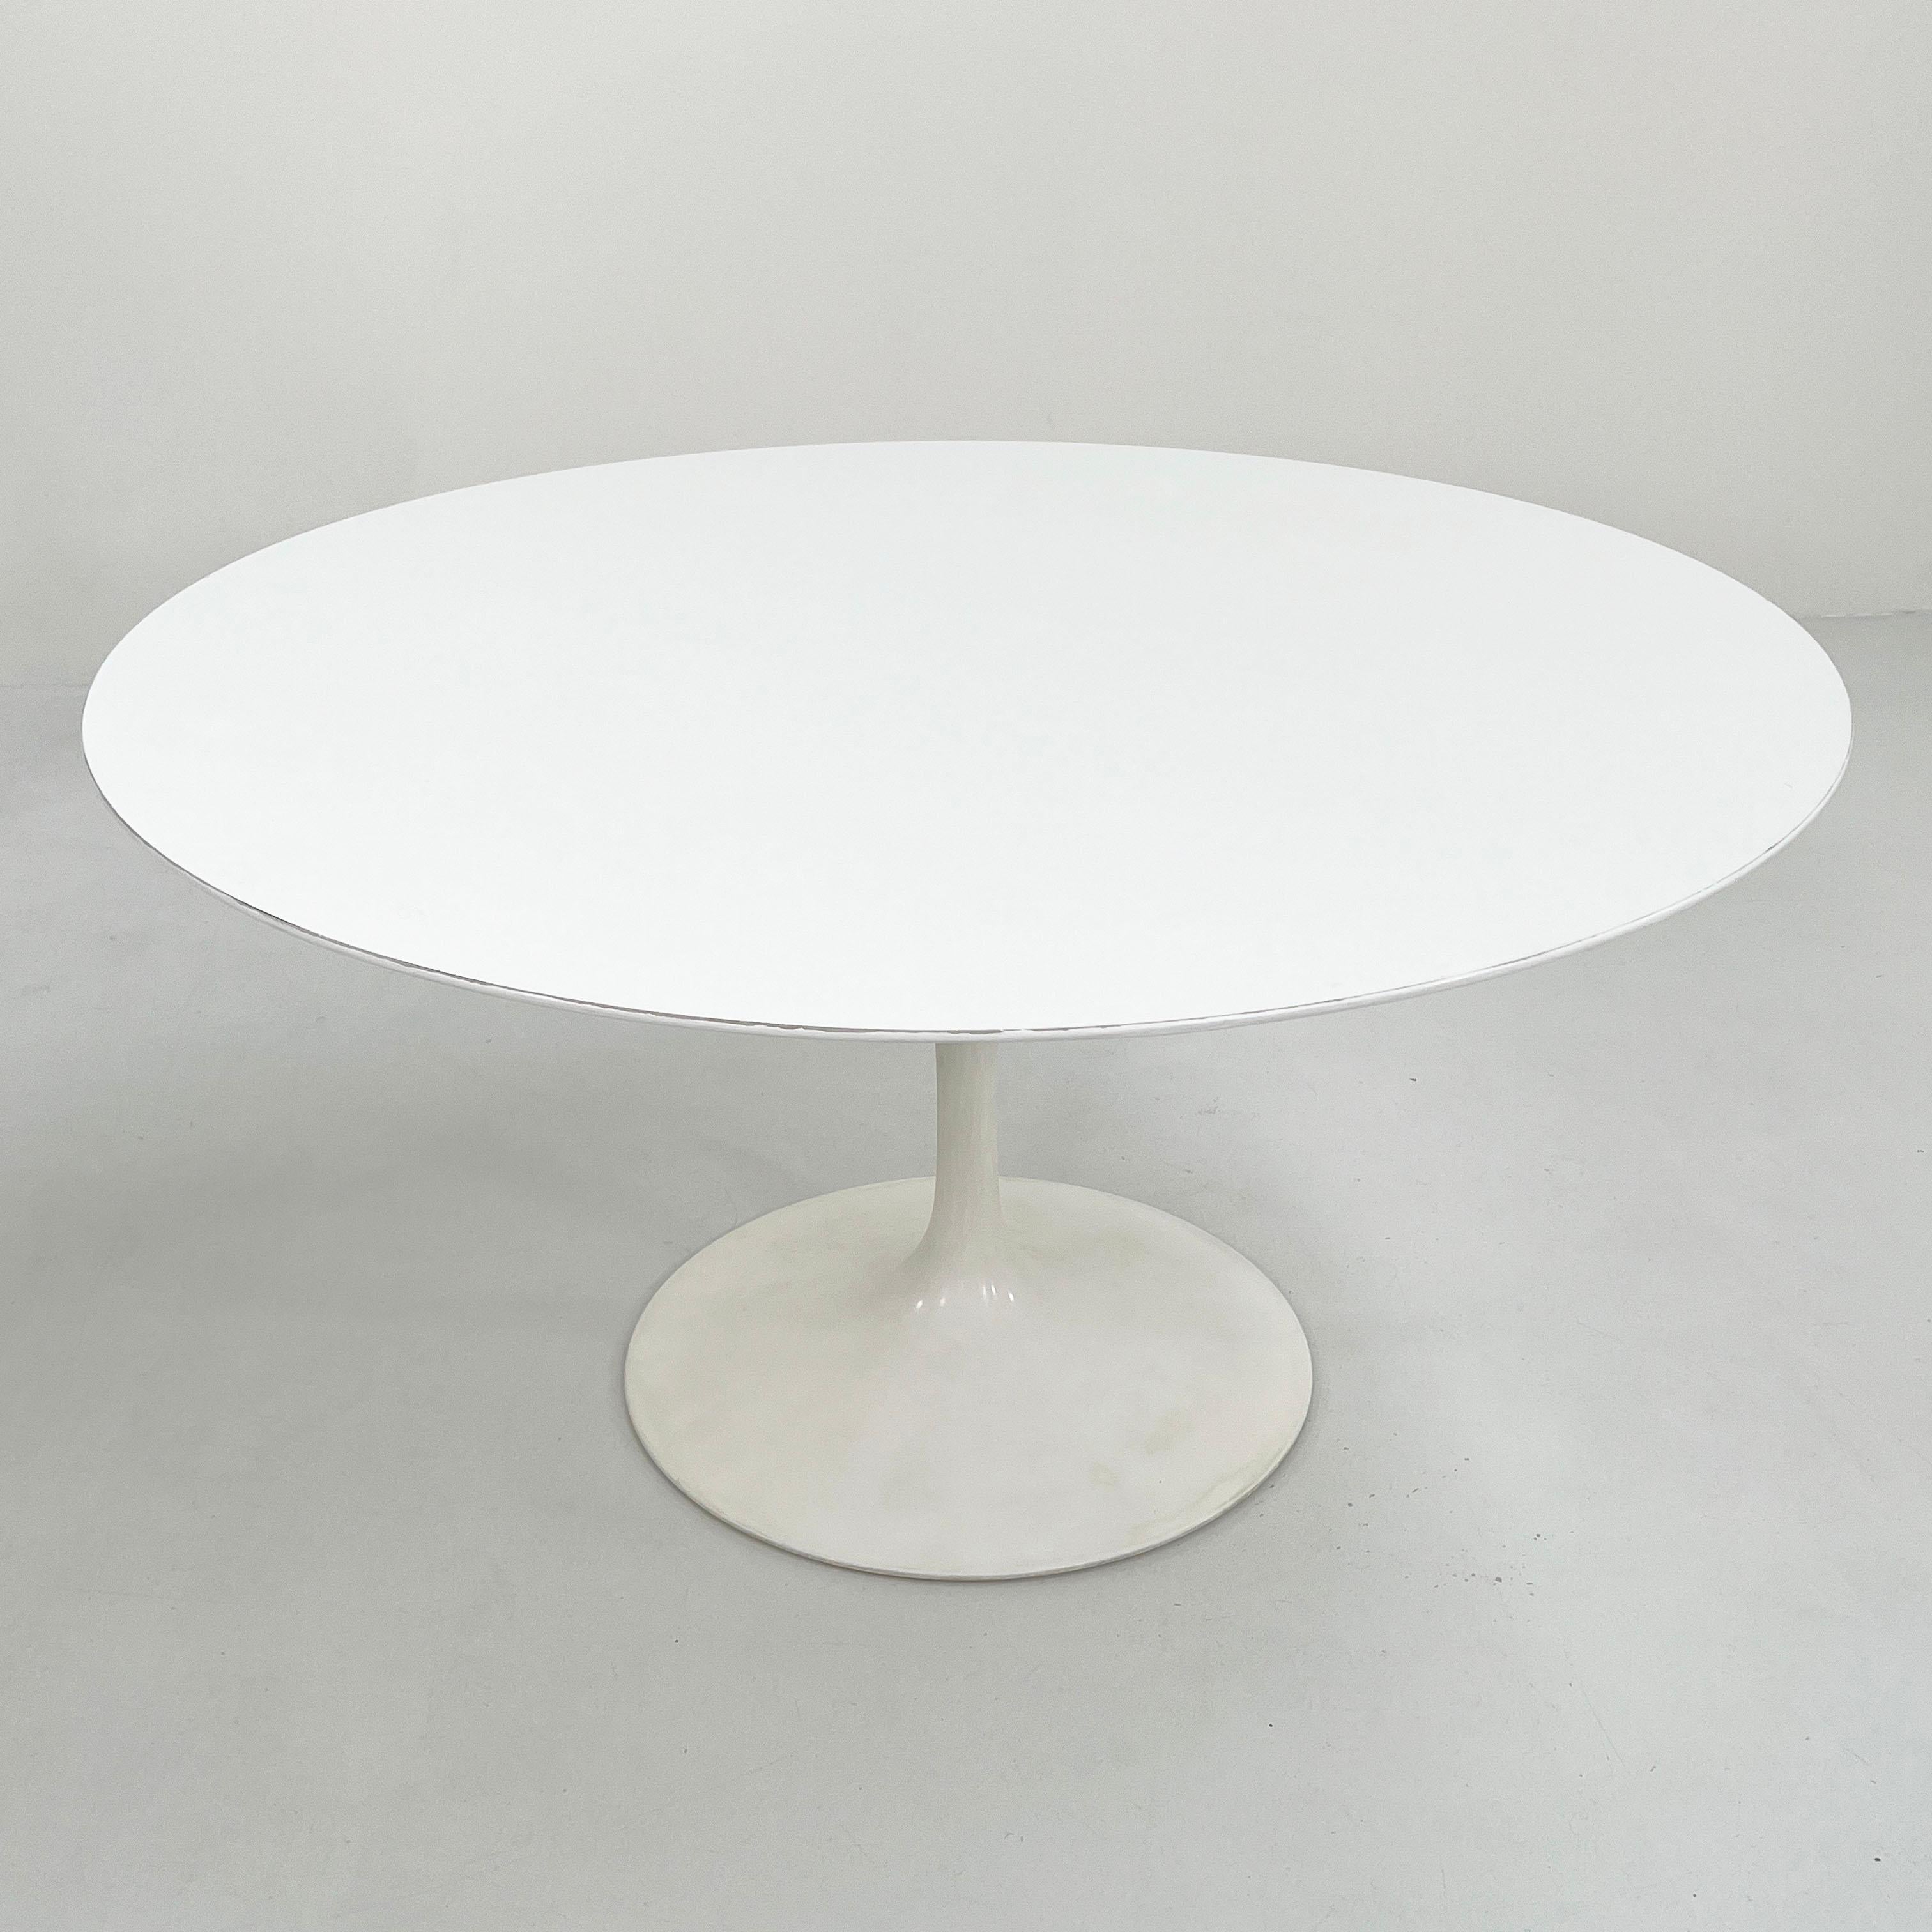 Late 20th Century Laminate Tulip Dining Table by Eero Saarinen for Knoll, 1970s